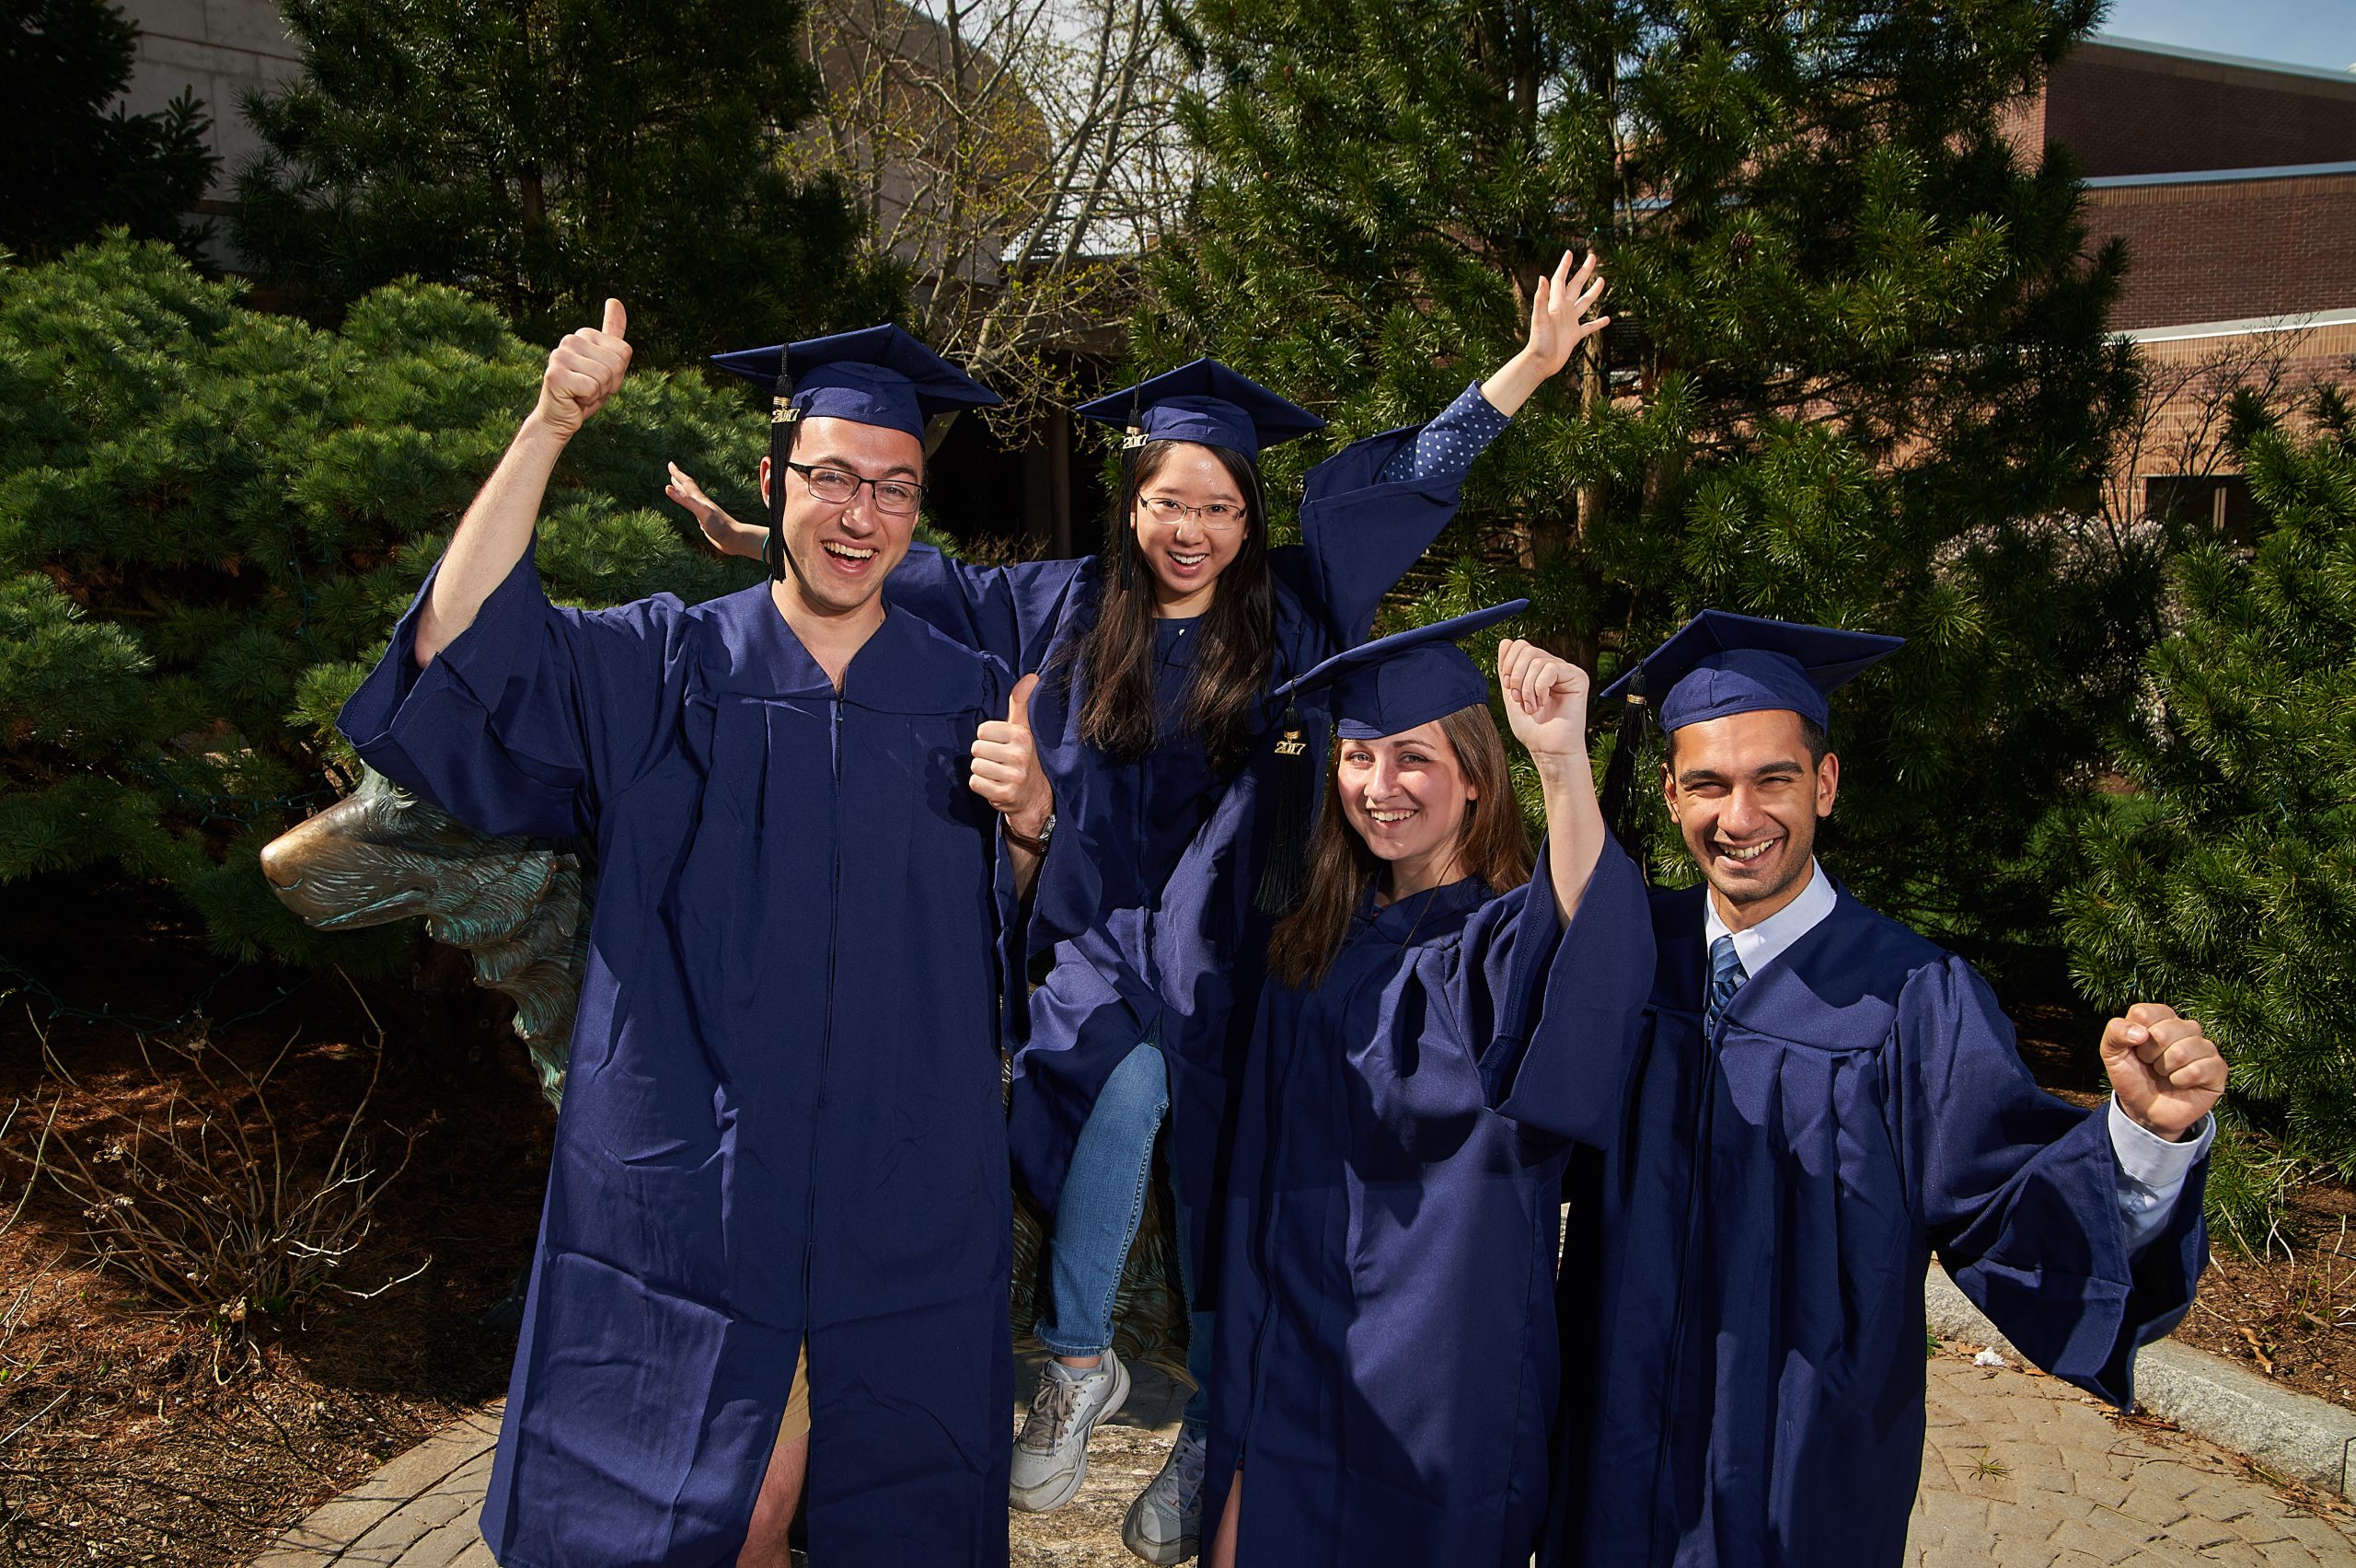 Students in Cap and Gowns together